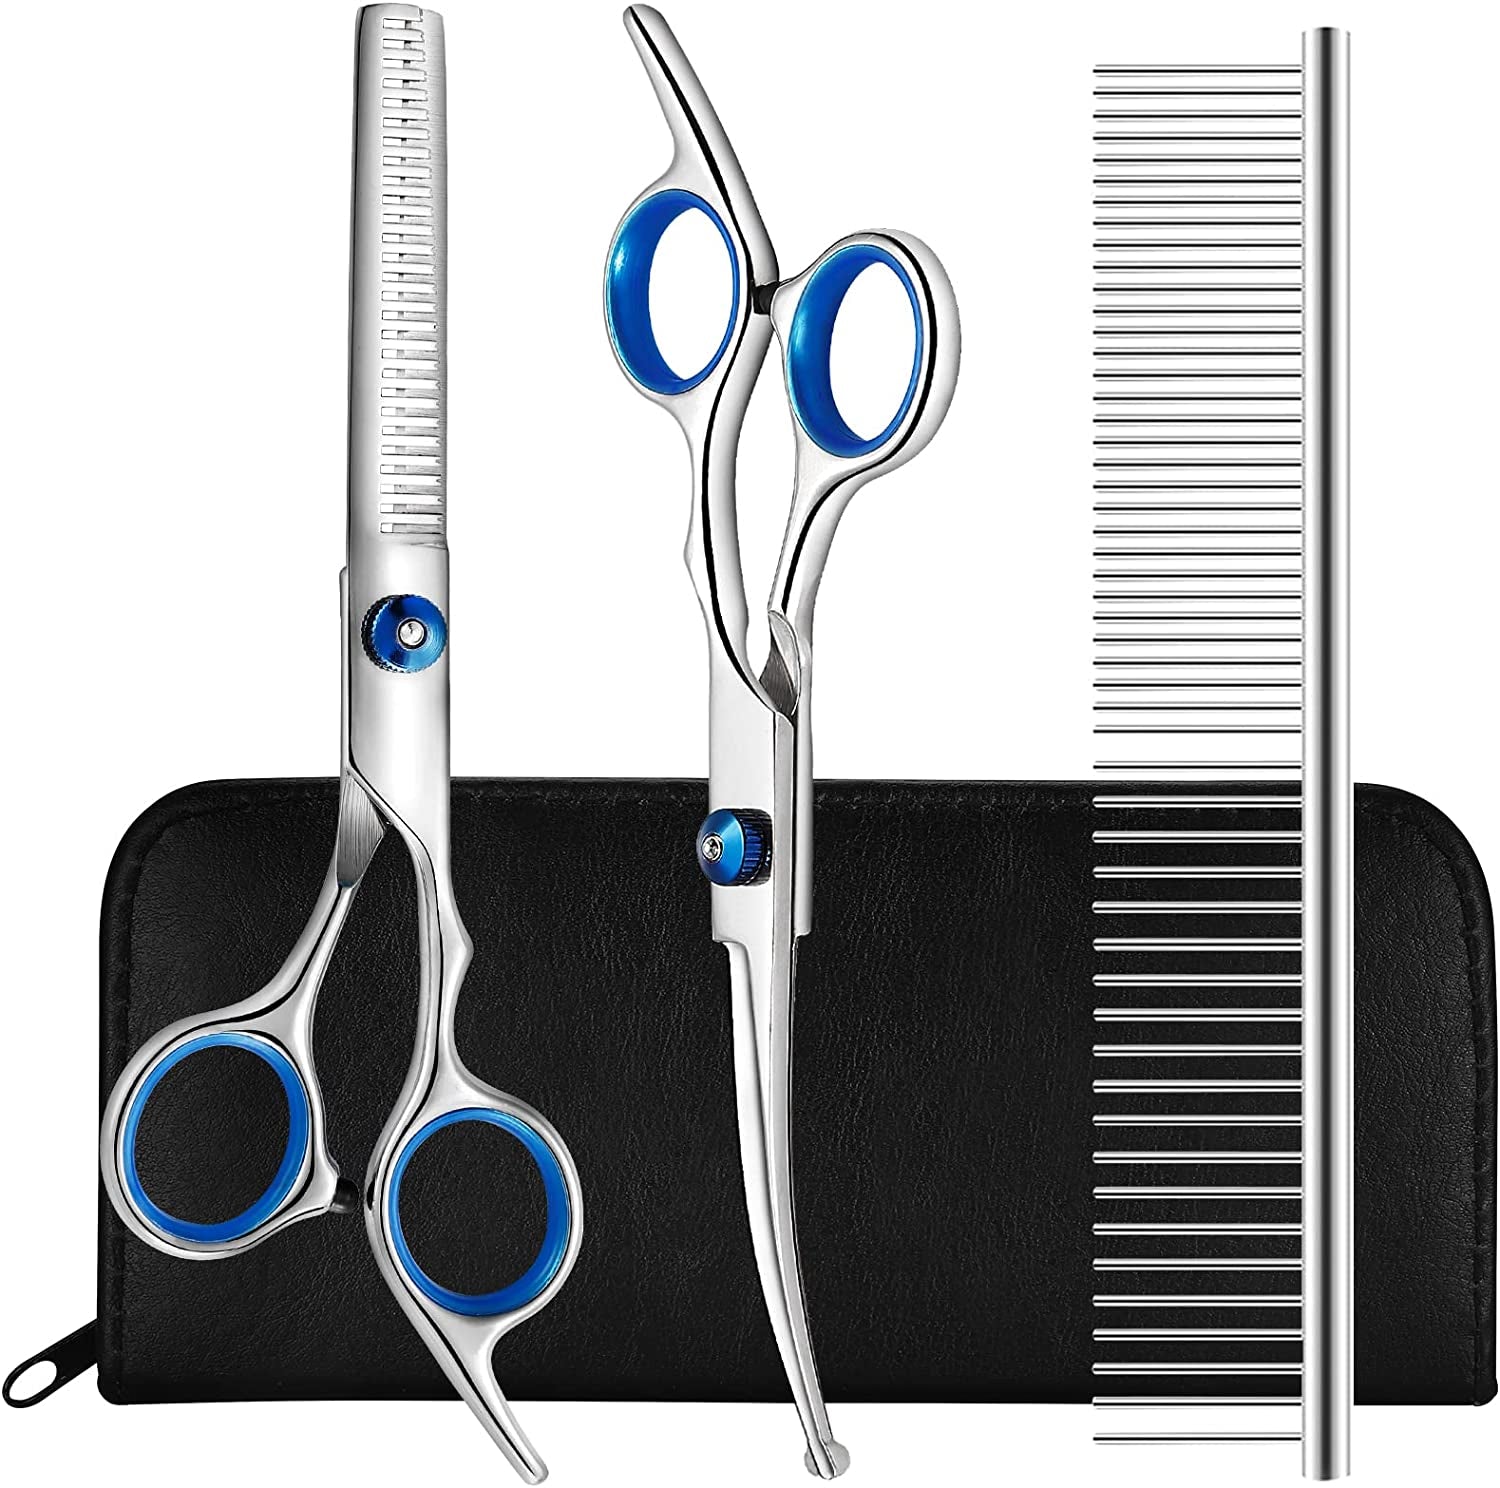 Dog Grooming Scissors Kit with Safety round Tips, Liren Professional 3 in 1 Dog Grooming Shears Set, Sharp and Durable Pet Grooming Shears for Dogs and Cats